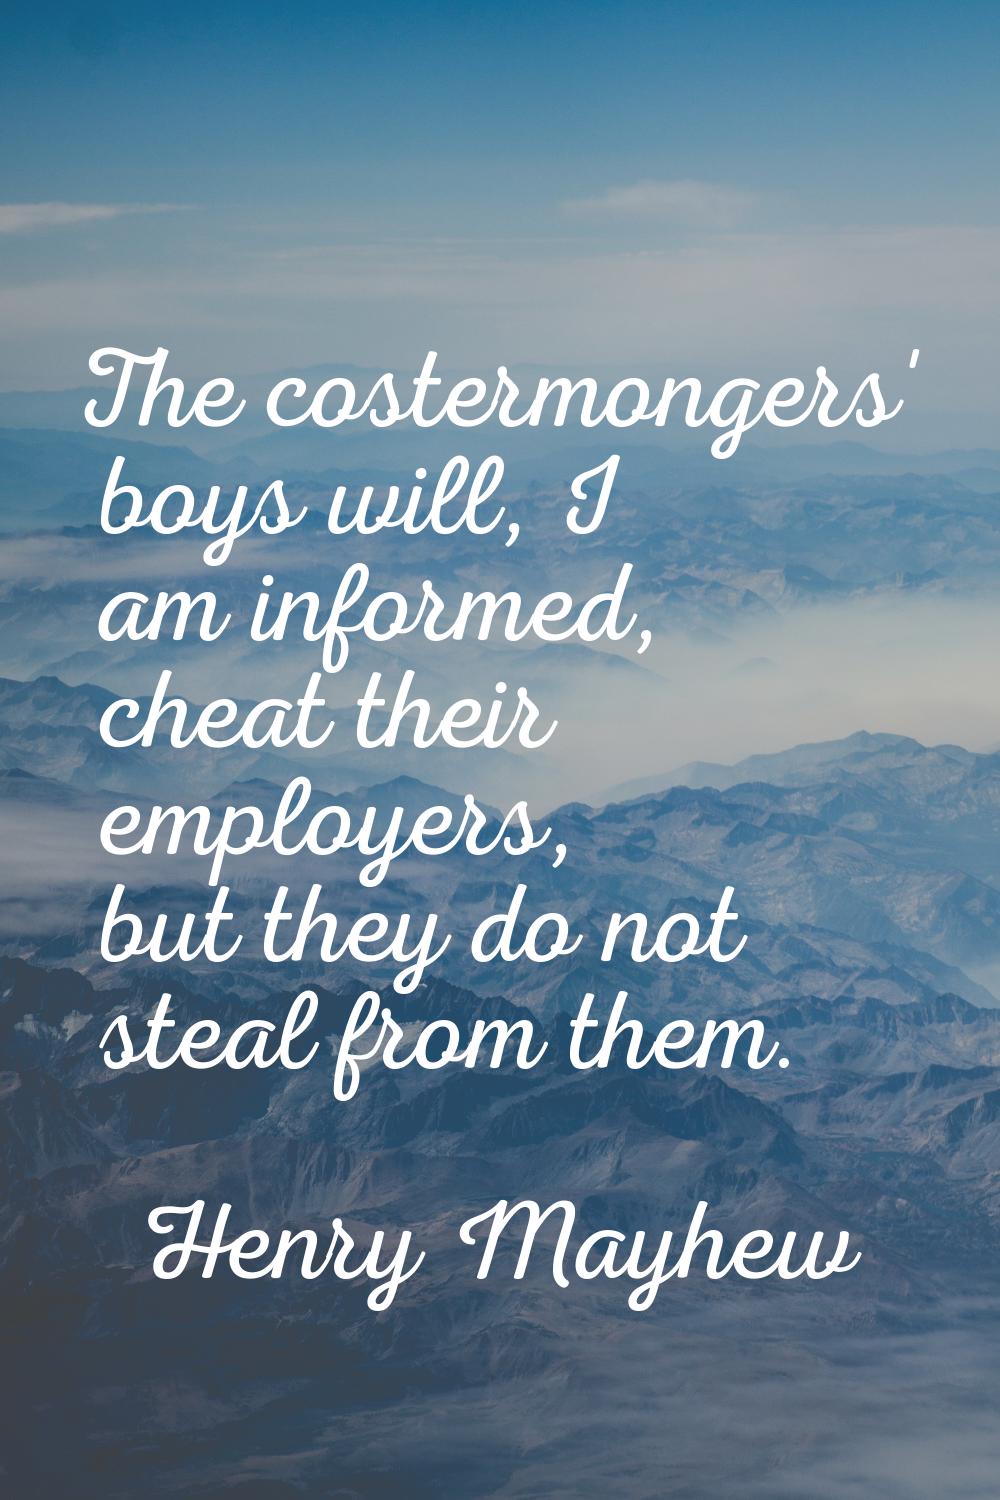 The costermongers' boys will, I am informed, cheat their employers, but they do not steal from them